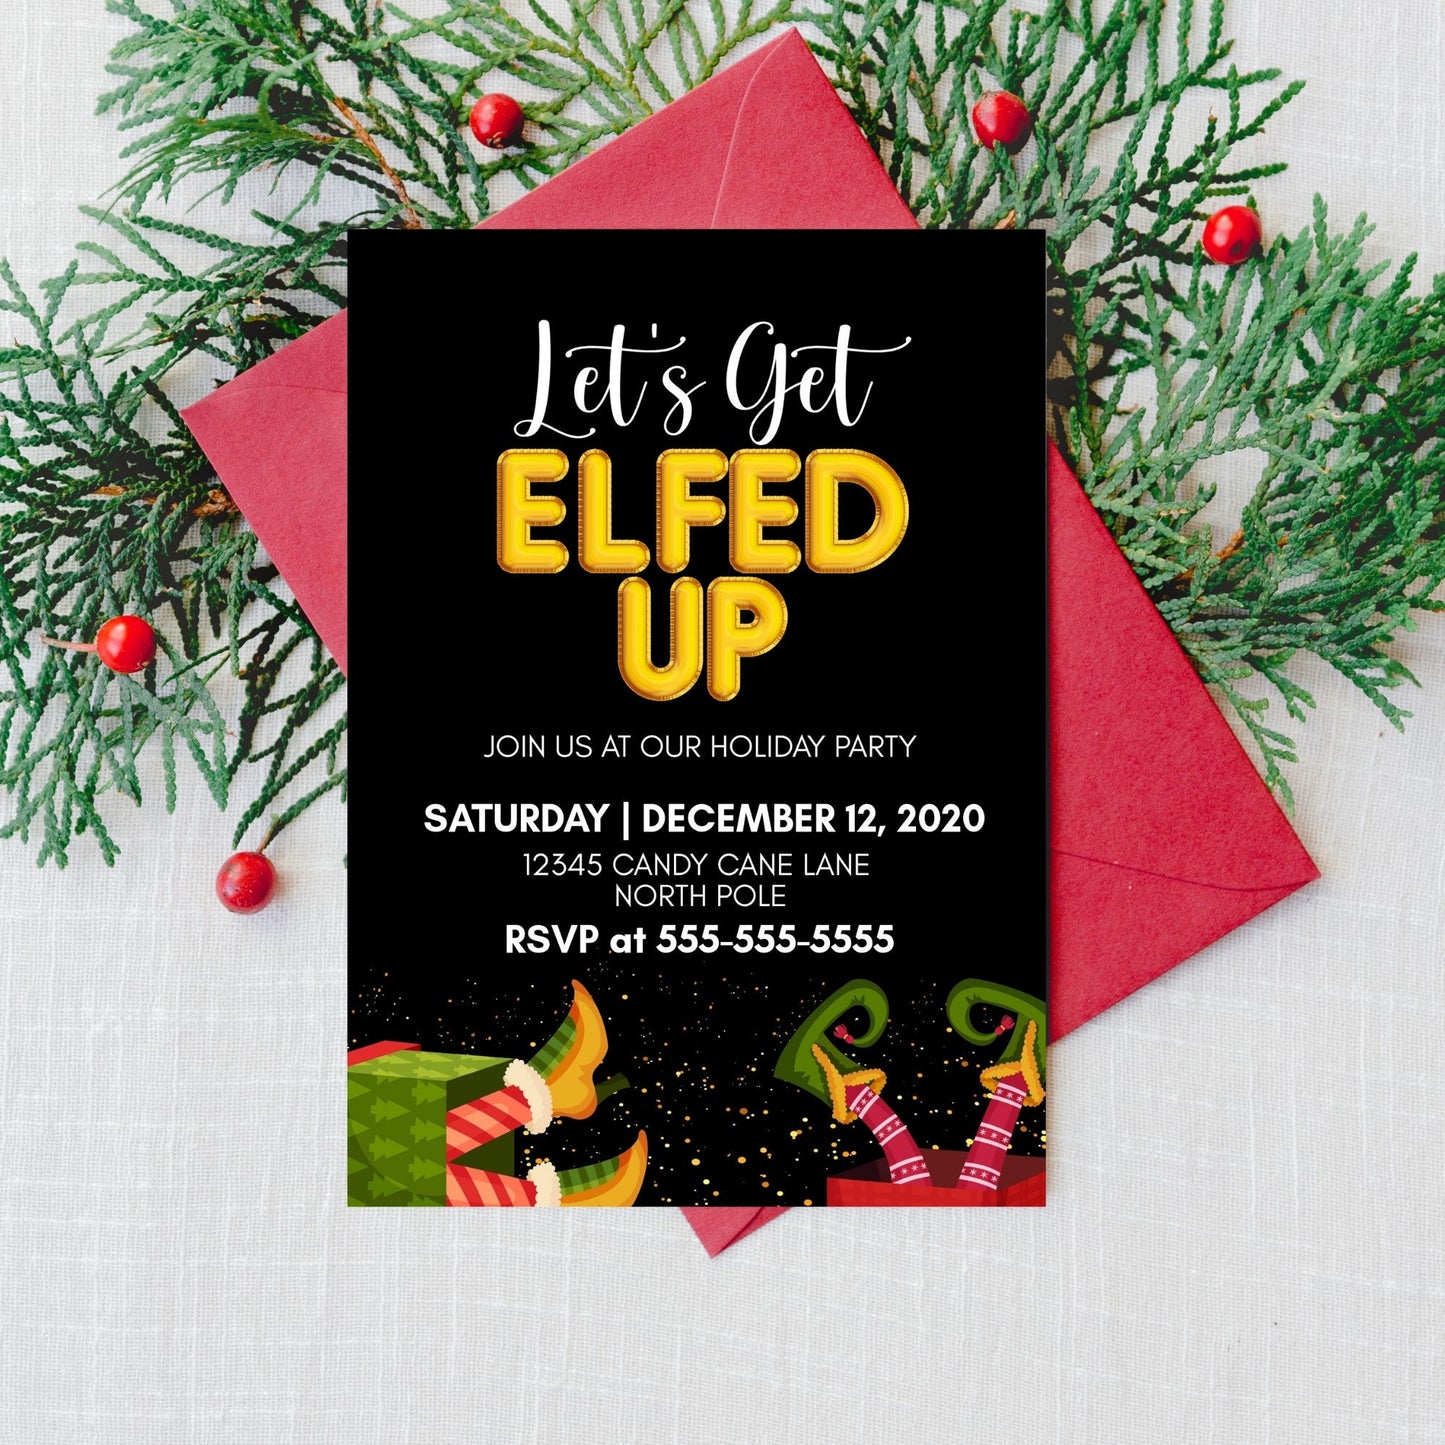 Let's Get Elfed Up Christmas Party Invite | Adult Holiday Party Electronic Invitation | Editable Ecard Invite